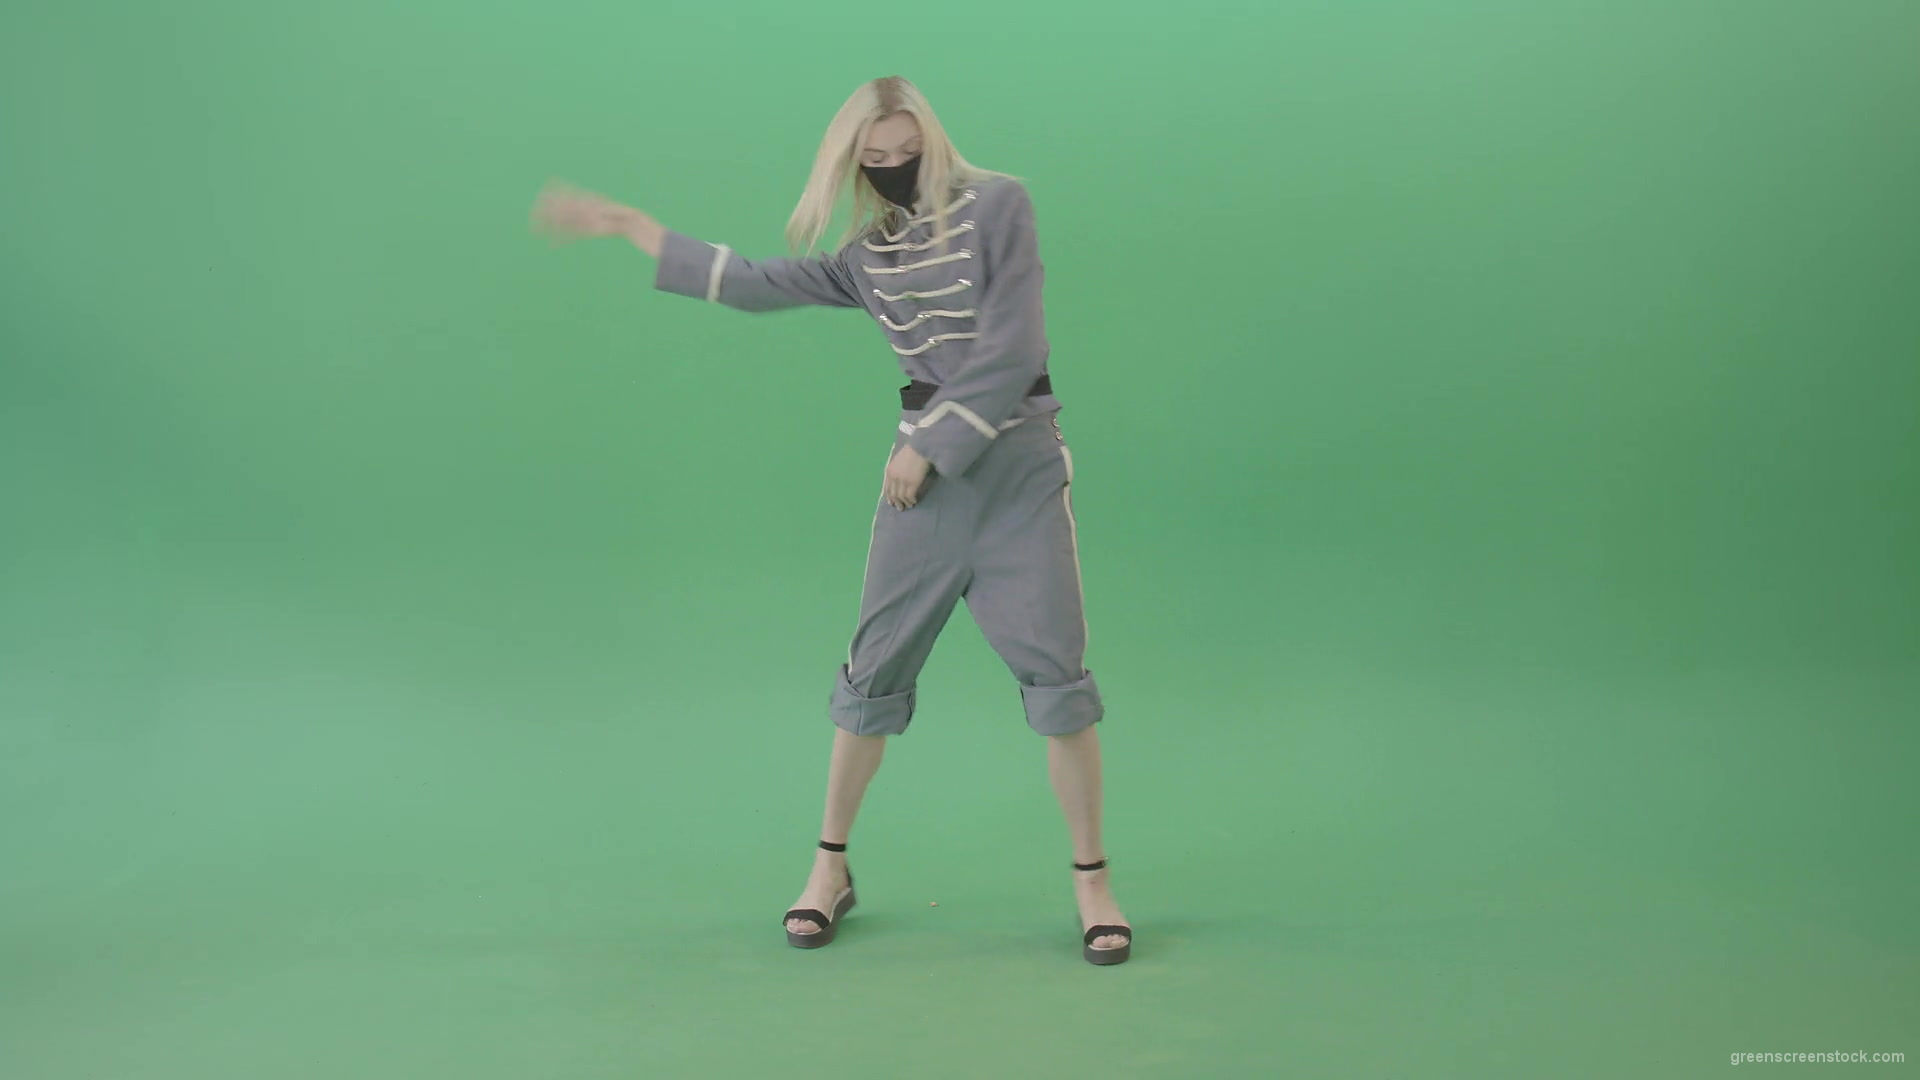 Blondie-in-Techno-royal-costume-dancing-house-in-black-covid19-mask-on-green-screen-4K-Video-Footage-1920_006 Green Screen Stock